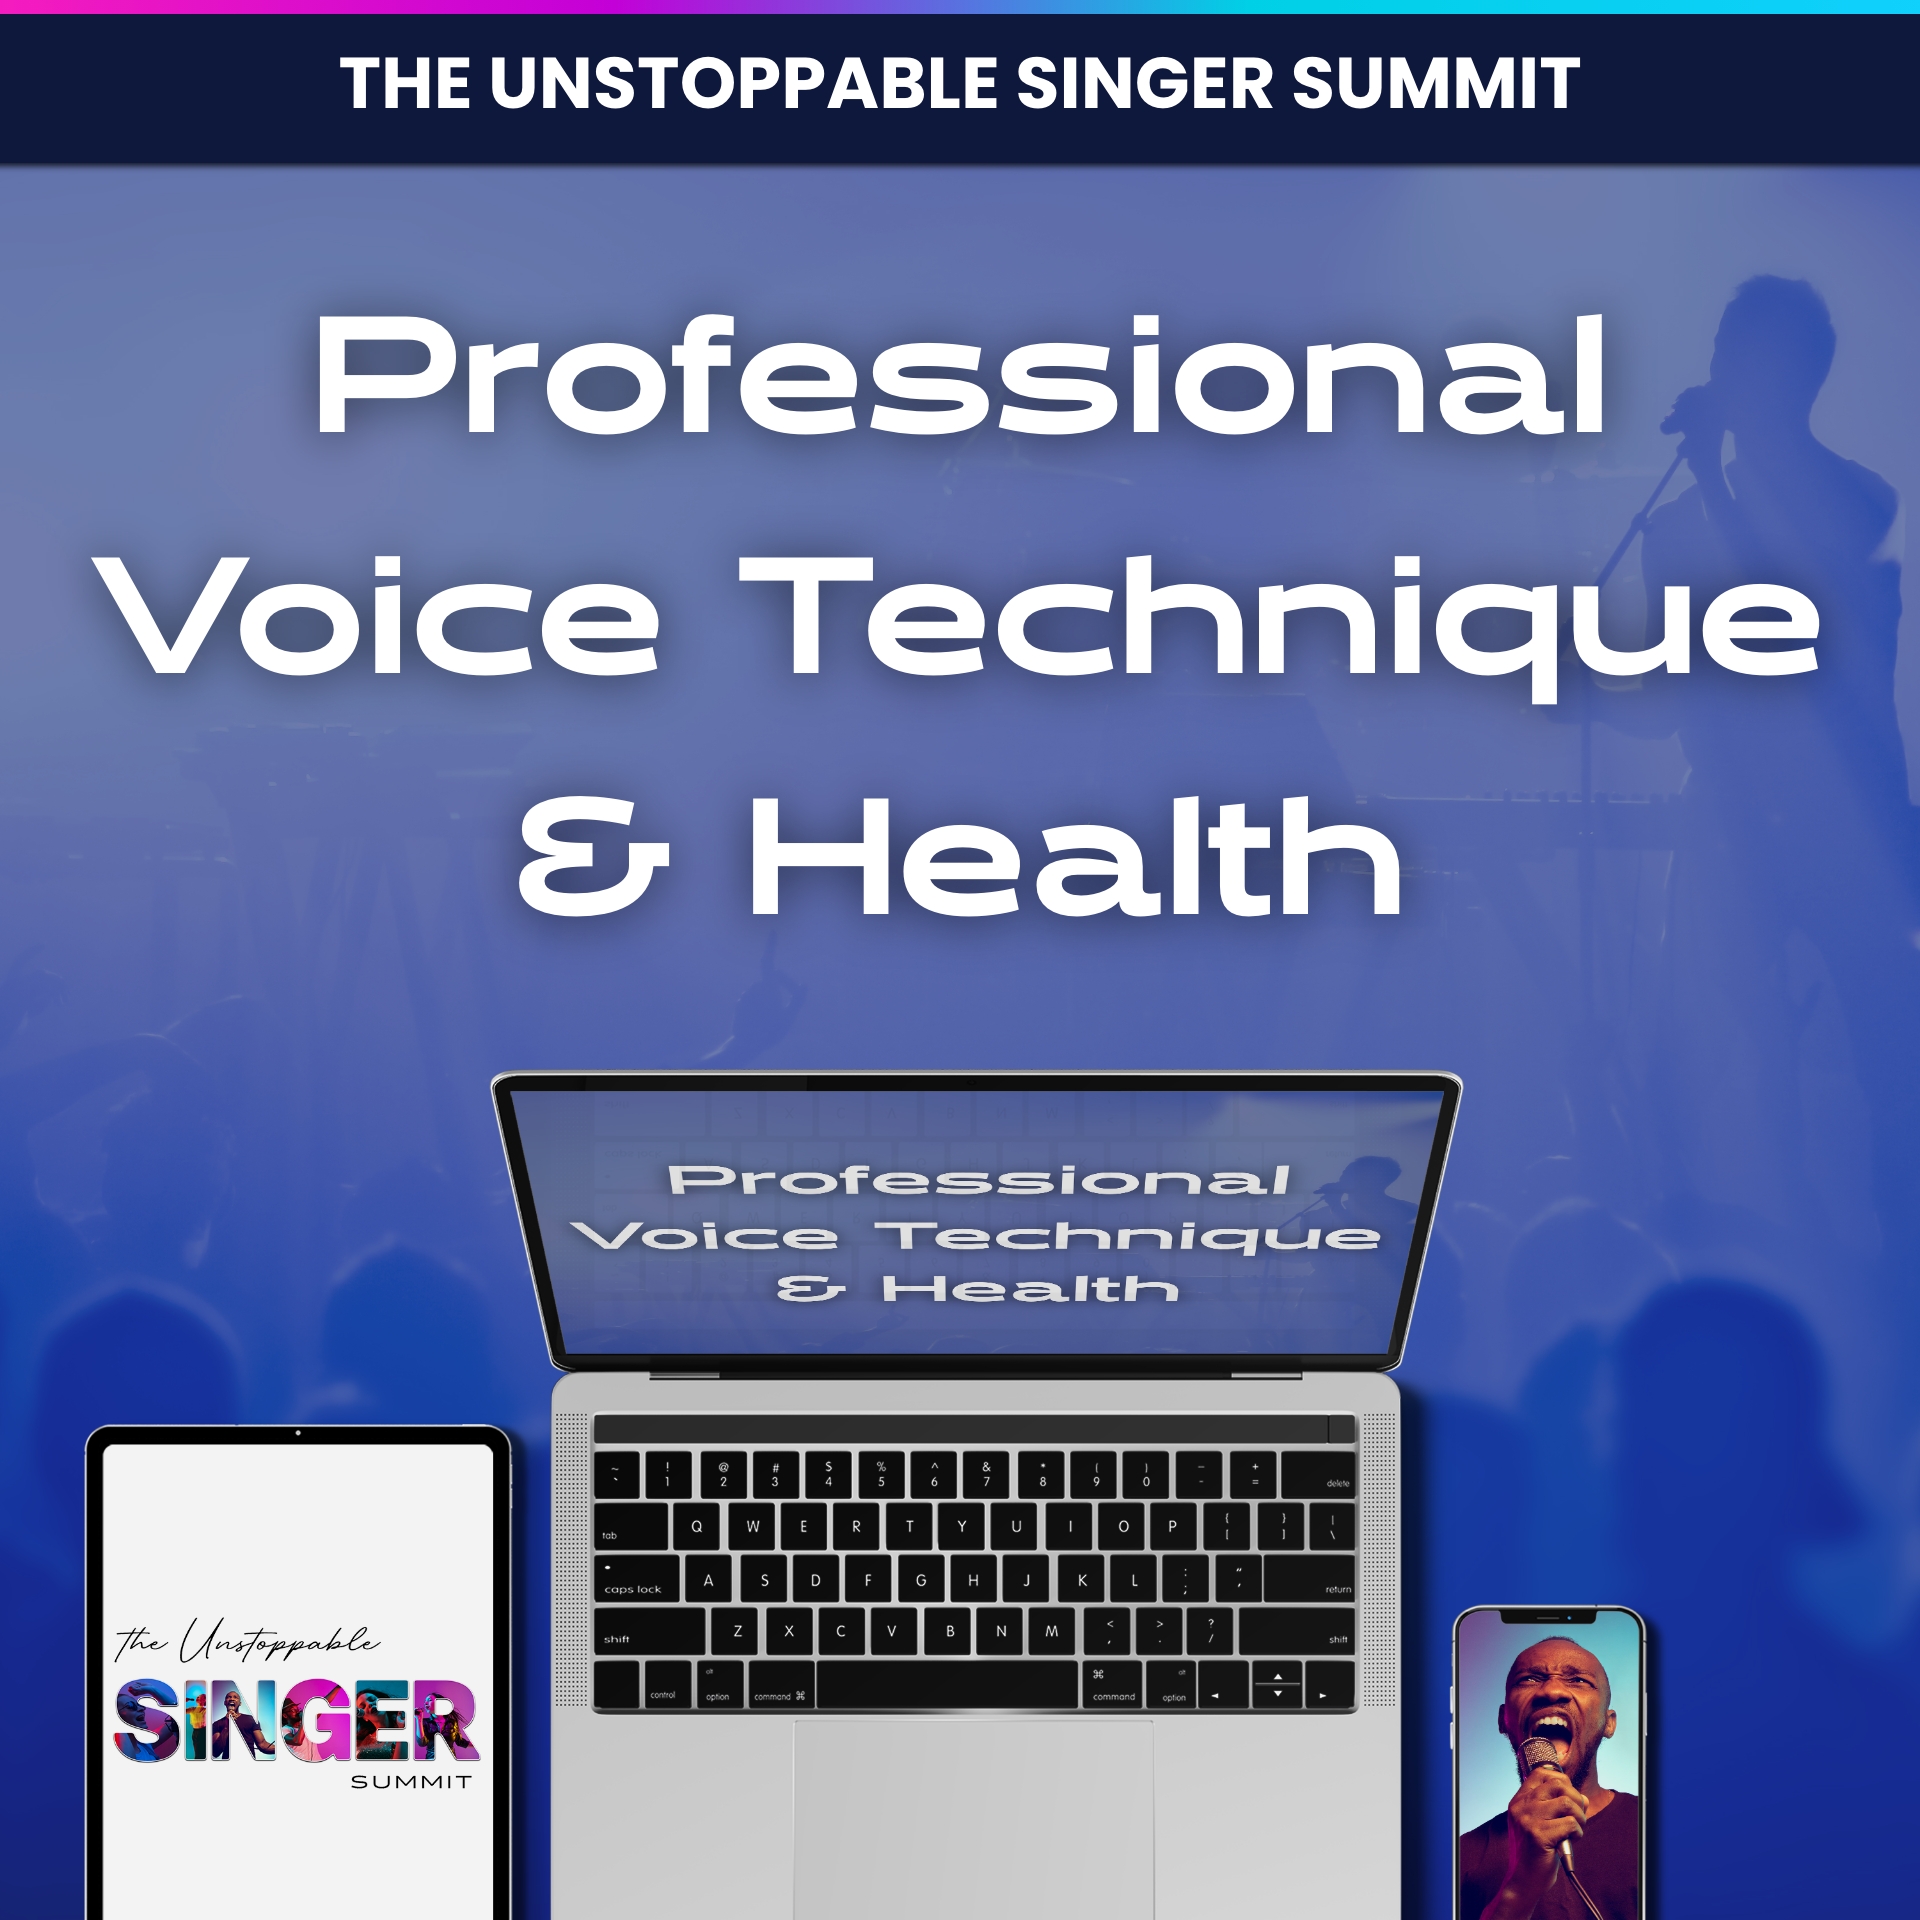 Professional Voice Technique and Health - the Unstoppable Singer Summit